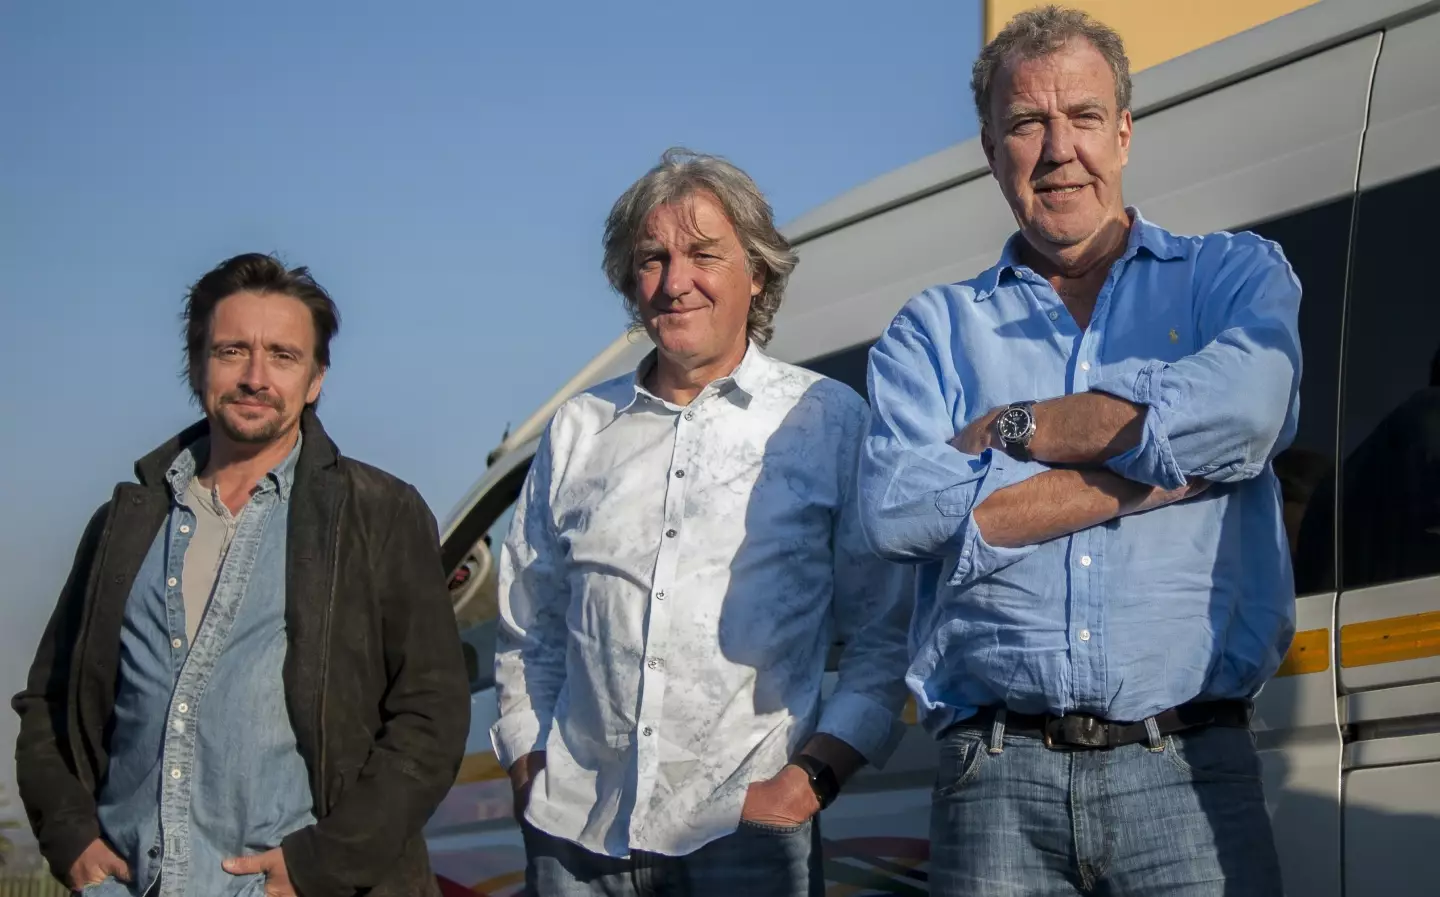 Now it seems as if The Grand Tour is also over.